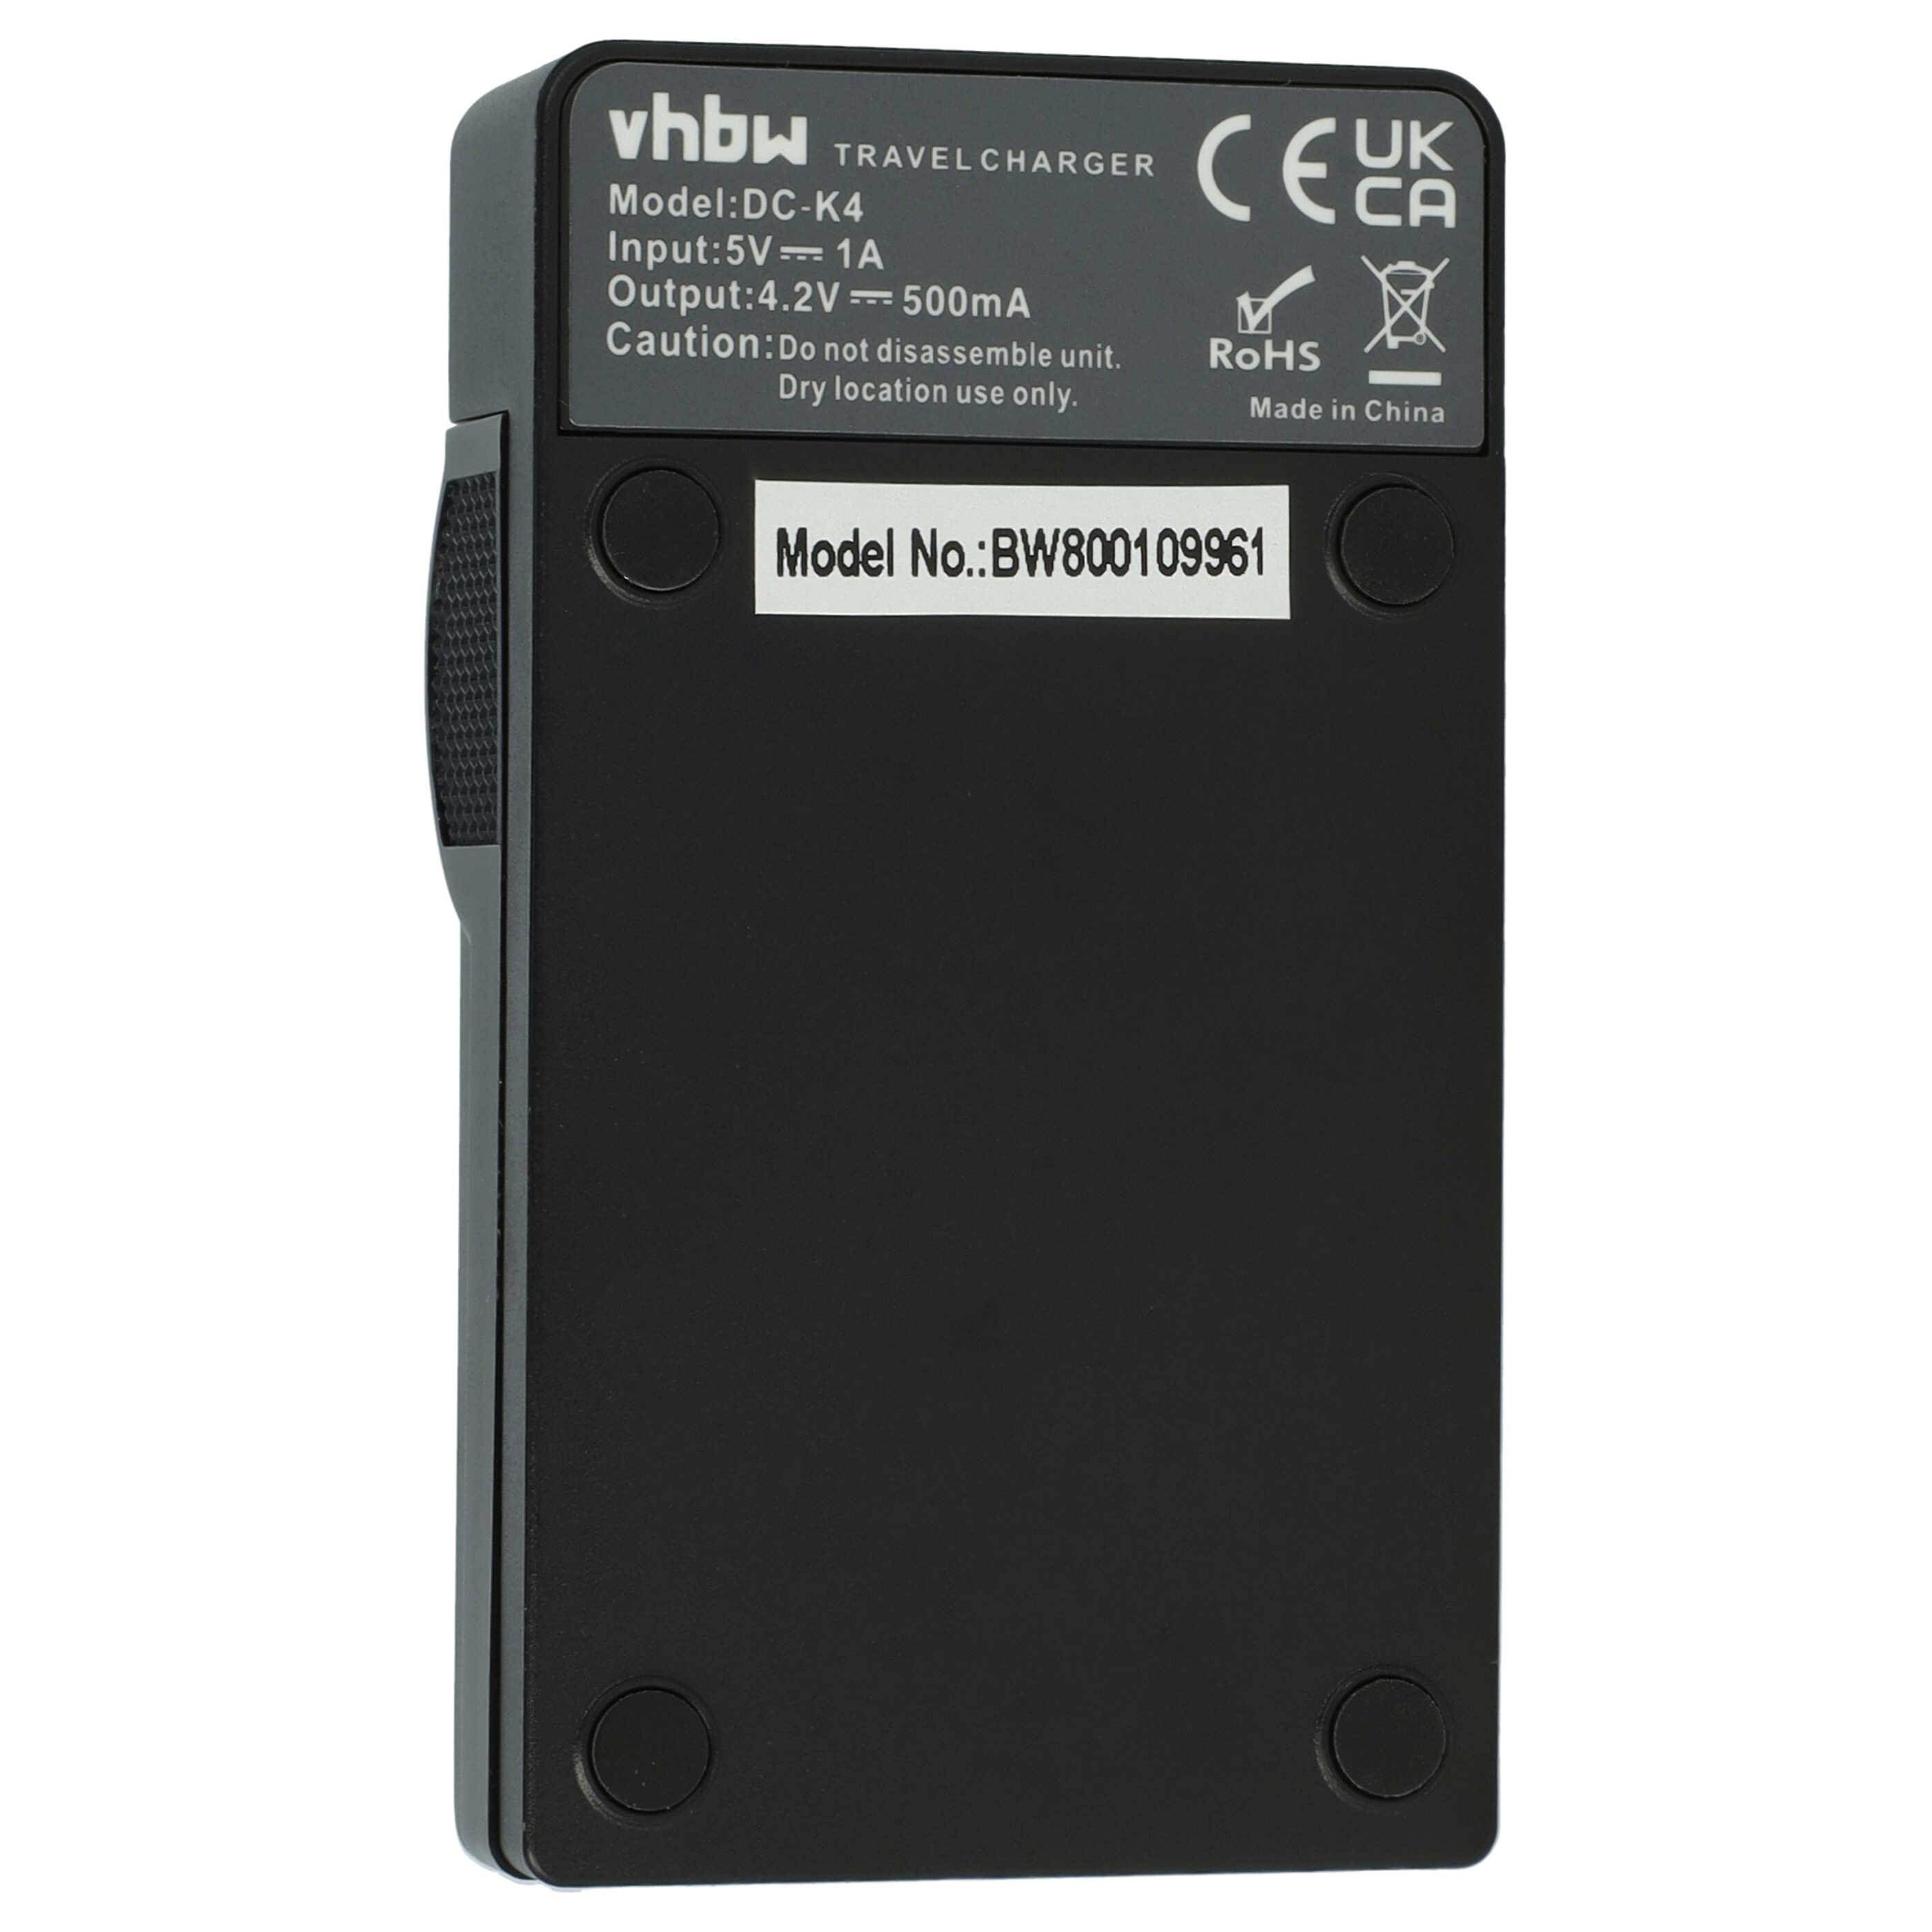 Battery Charger suitable for GZ-VX815 Camera etc. - 0.5 A, 4.2 V